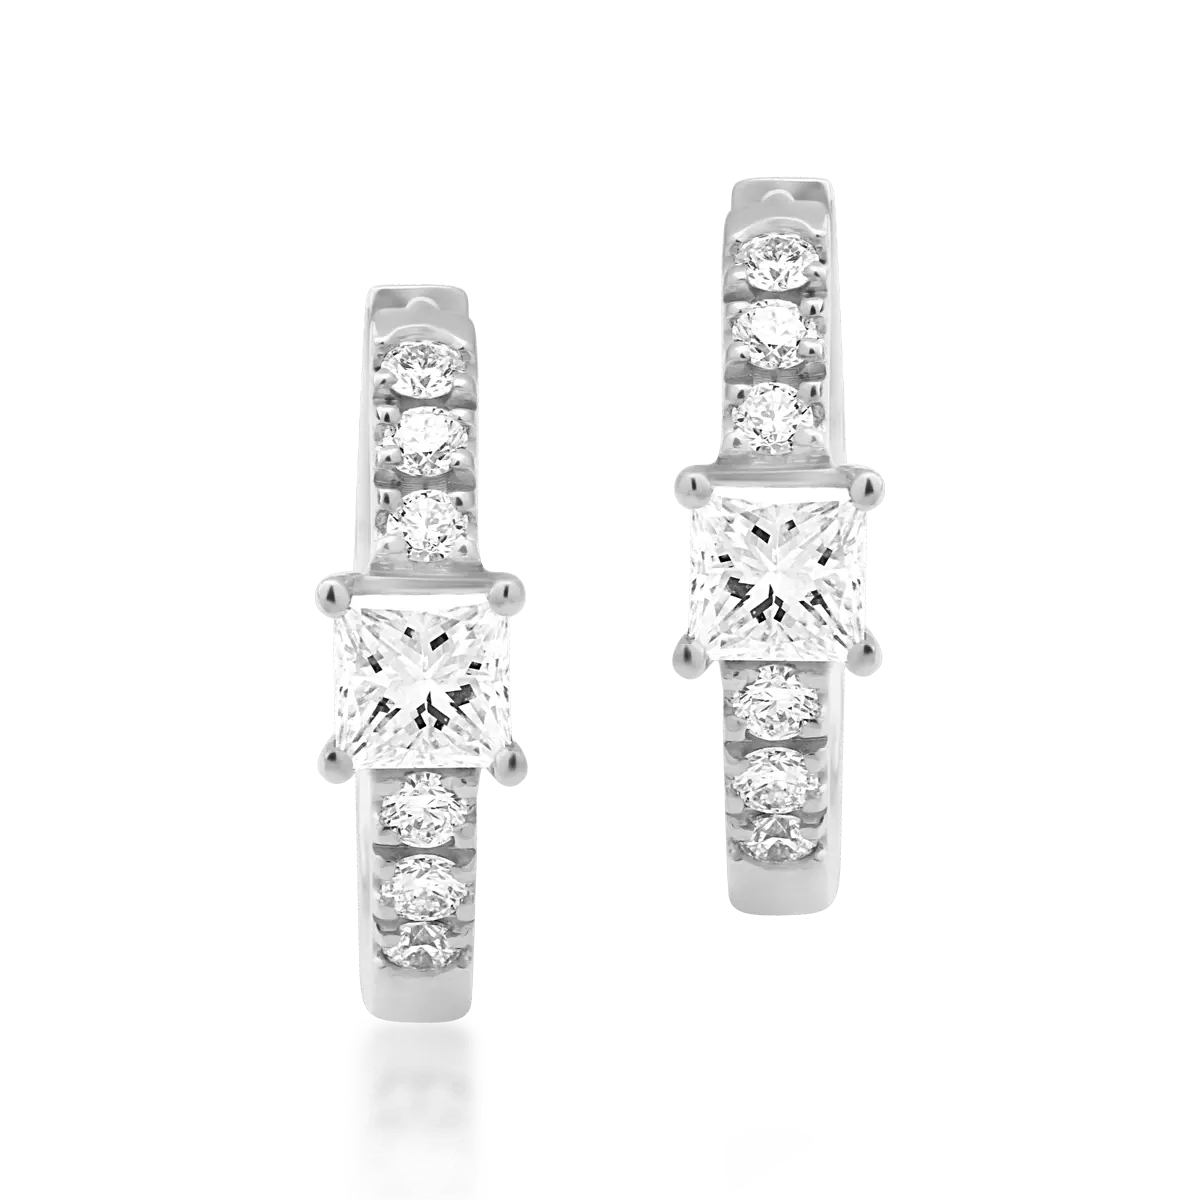 18K white gold earrings with 0.19ct diamonds